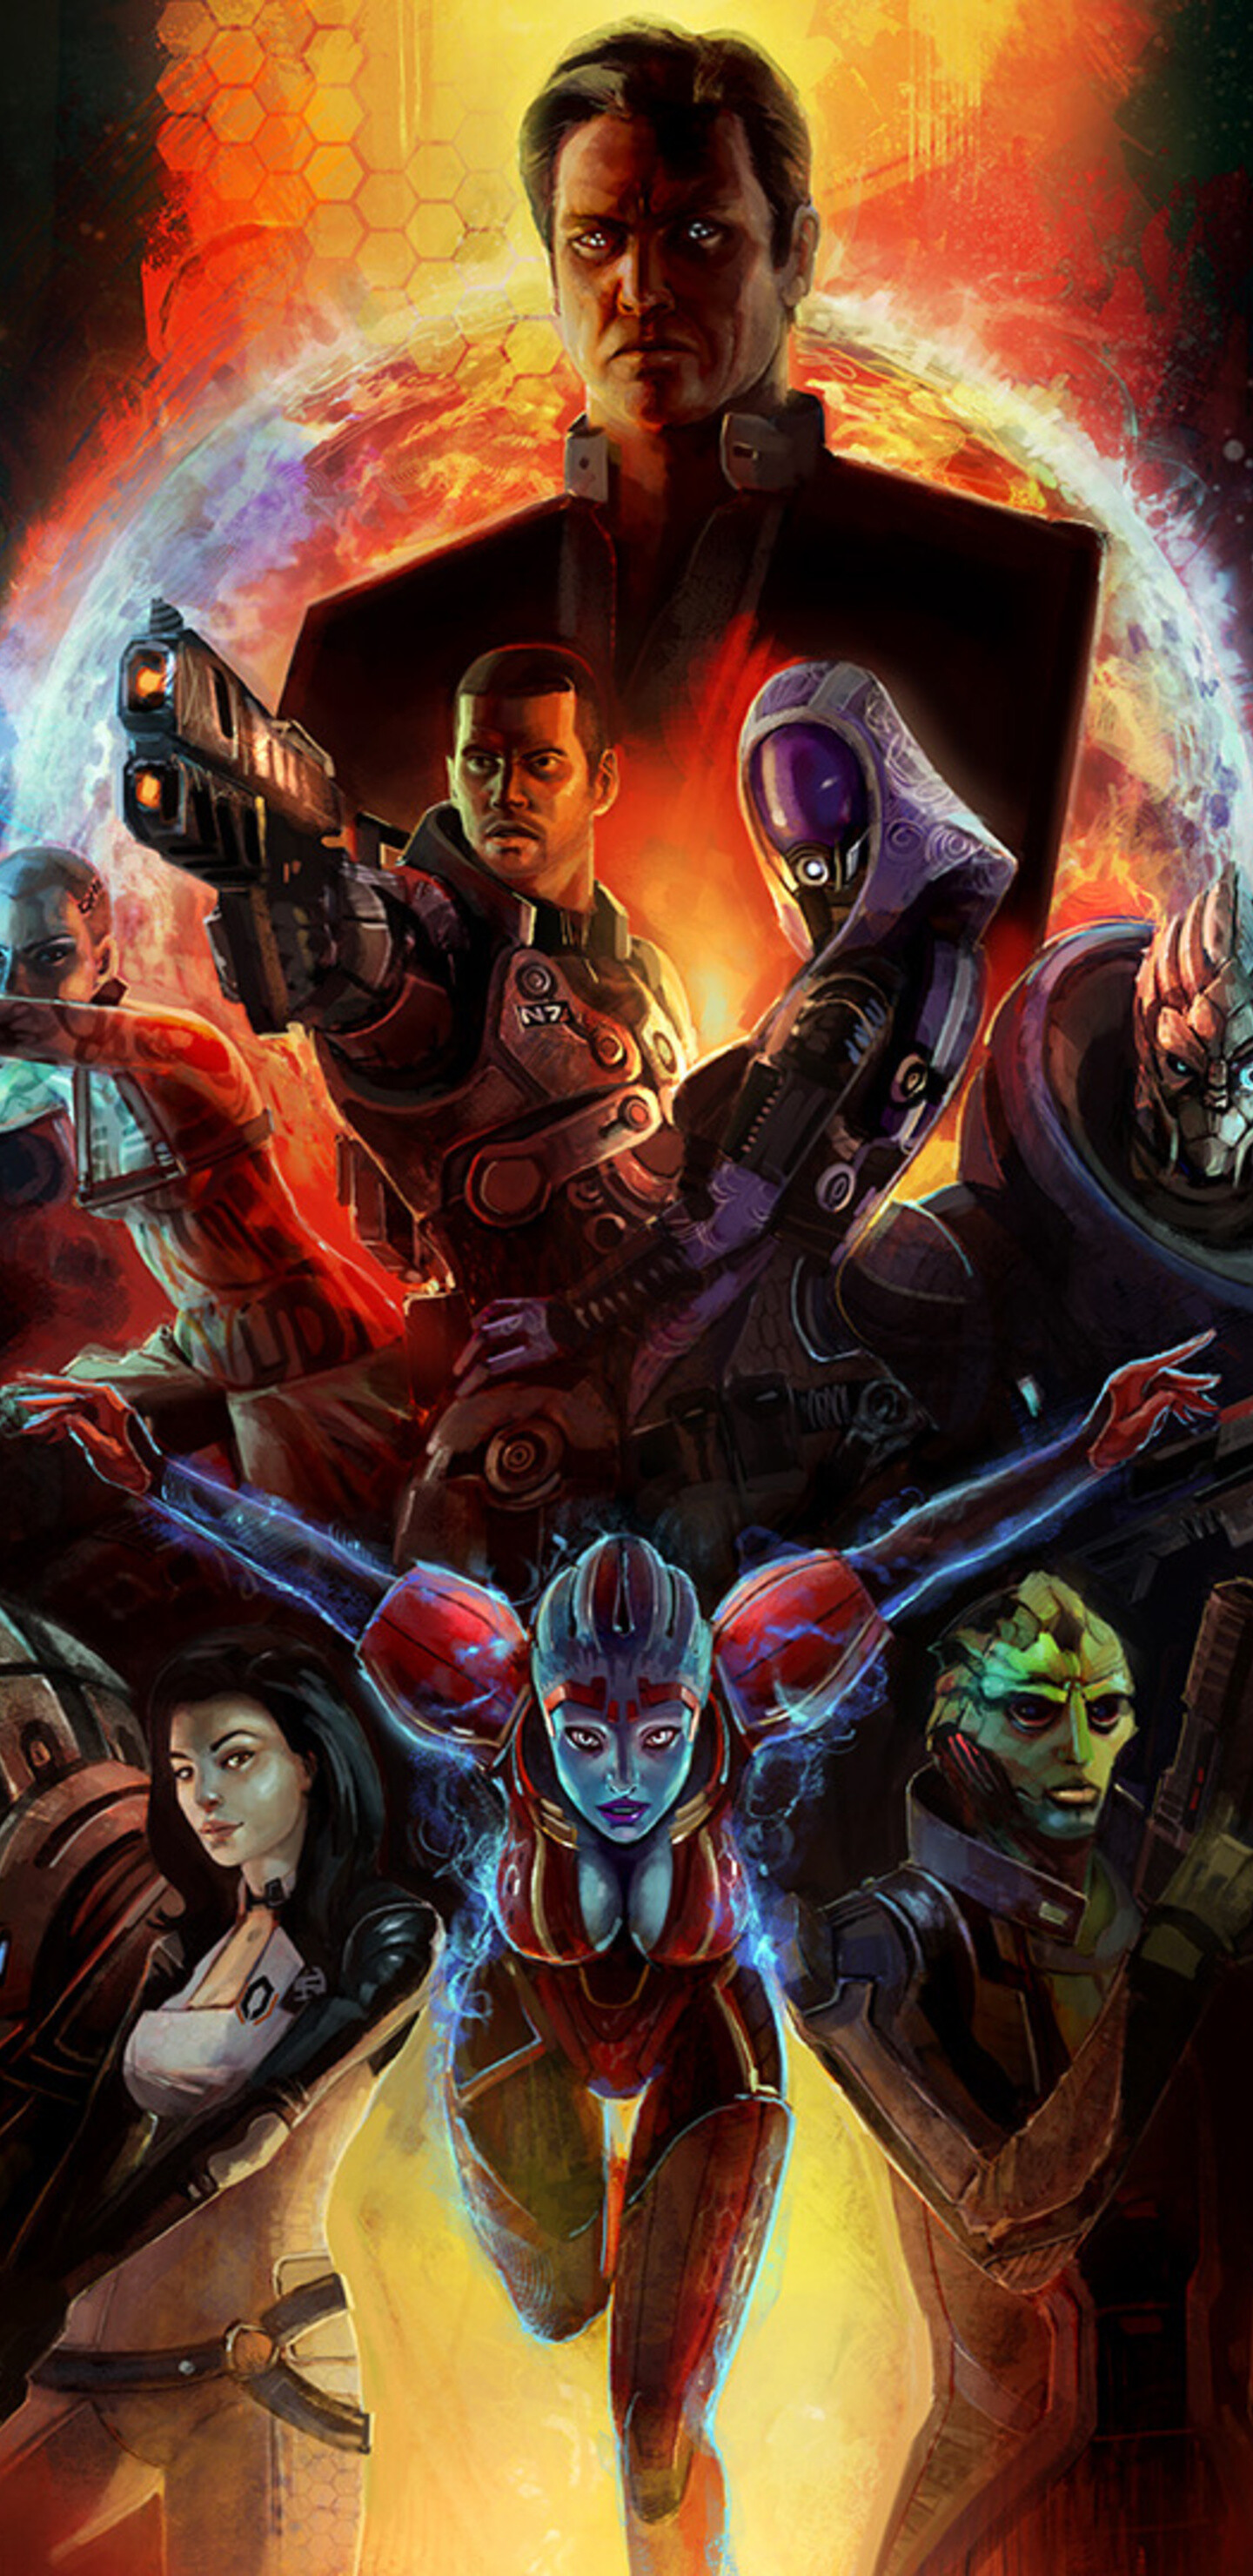 Mass Effect 2: The second installment, The franchise depicts a distant future. 1440x2960 HD Background.